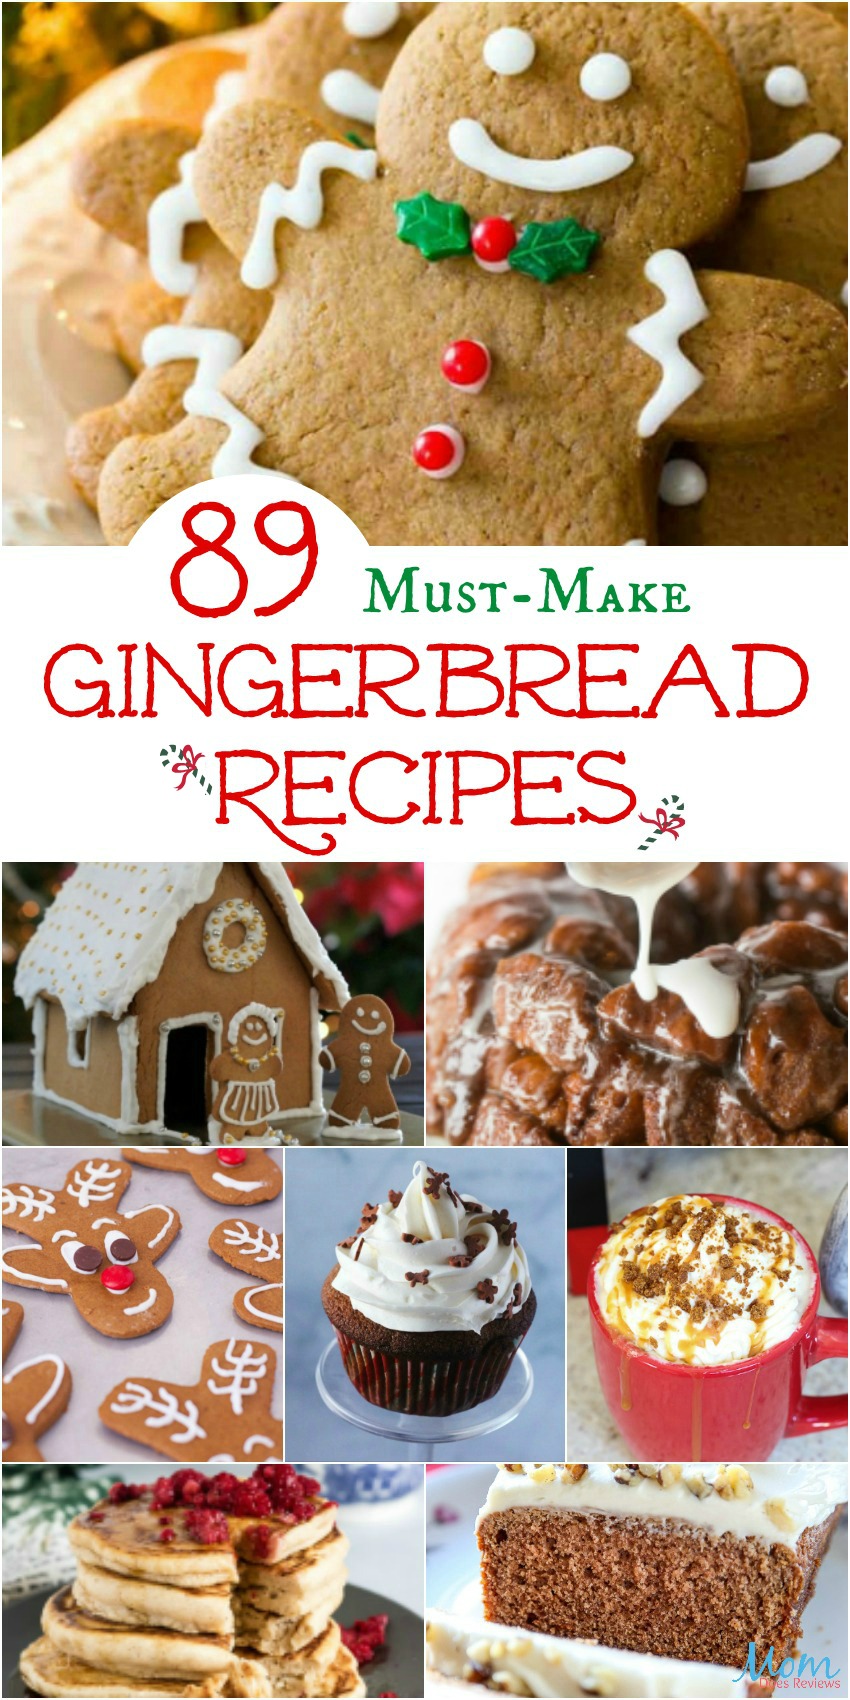 89 Must-Make Gingerbread Recipes Your Family Will Love #recipes #food #desserts #christmas #getinmybelly 